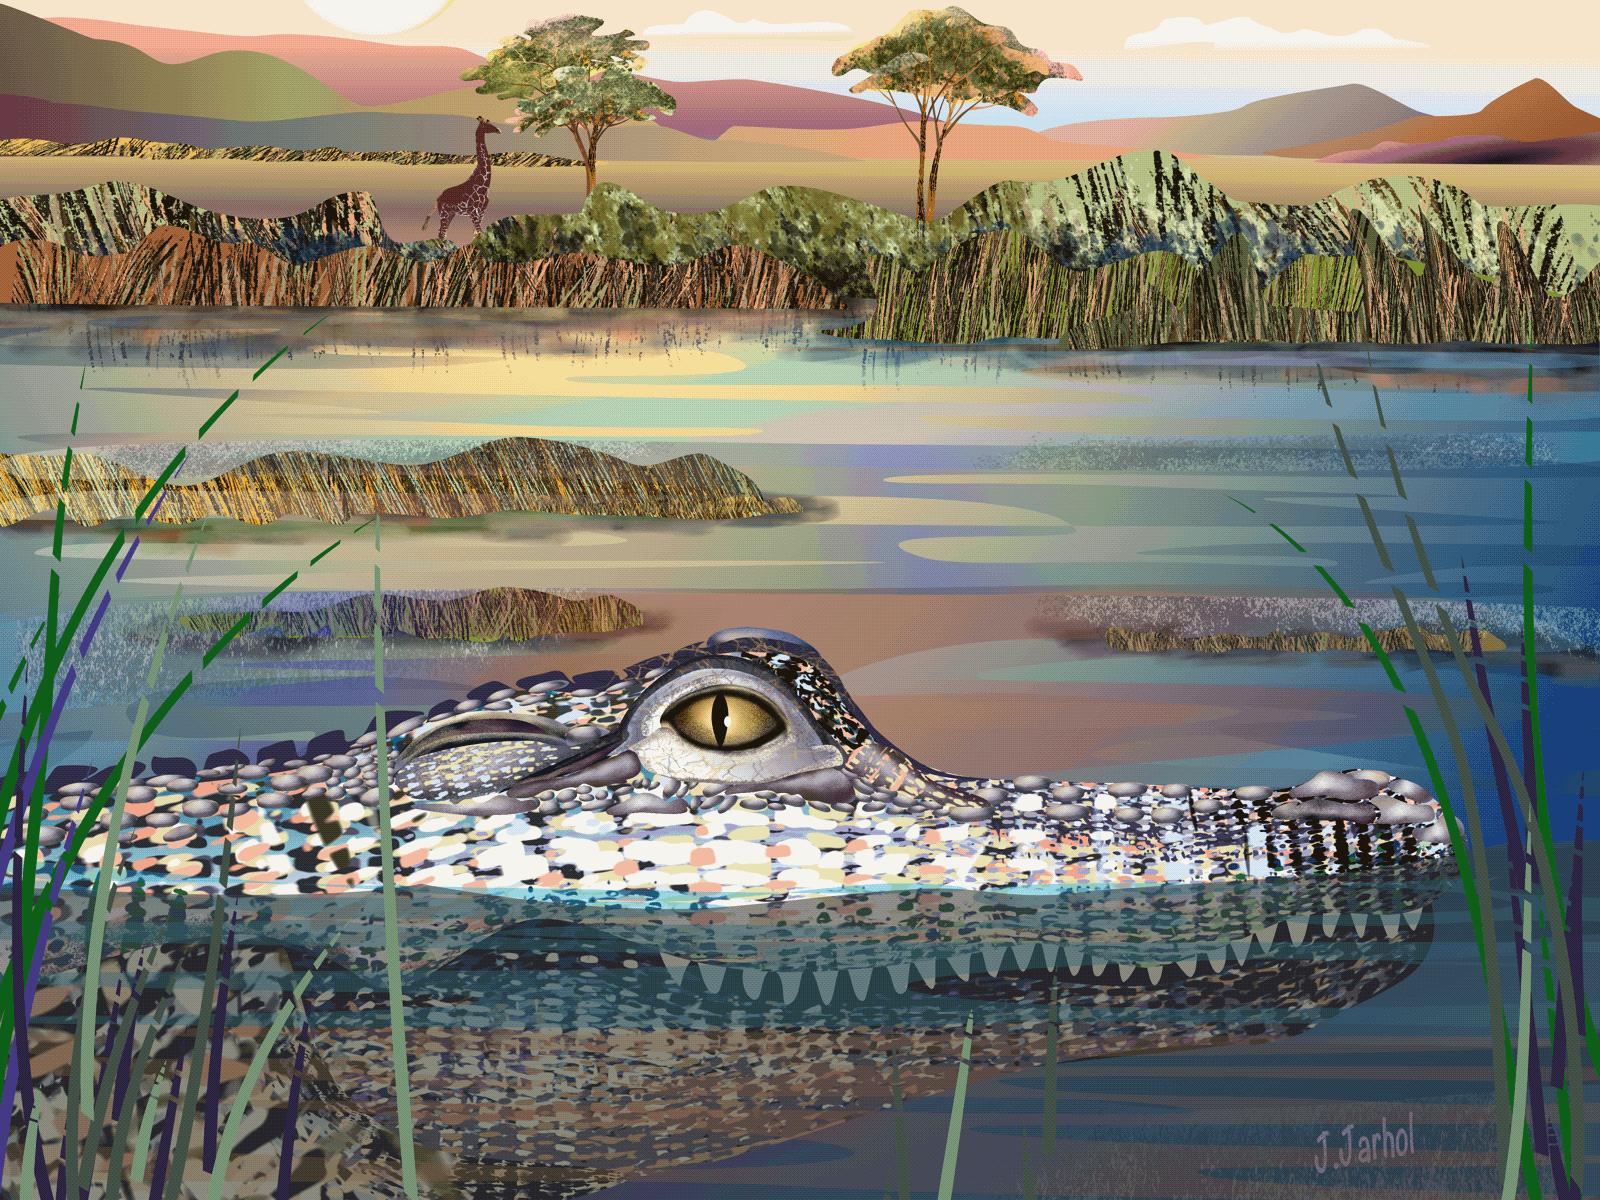 A gaze from the water 🐊 african animals alligator animated animated gif book illustration crocodile digital art digital illustration digital painting flat illustration illustration landscape landscape illustration murals posterart savannah travel illustration vector art vector illustration vectorart